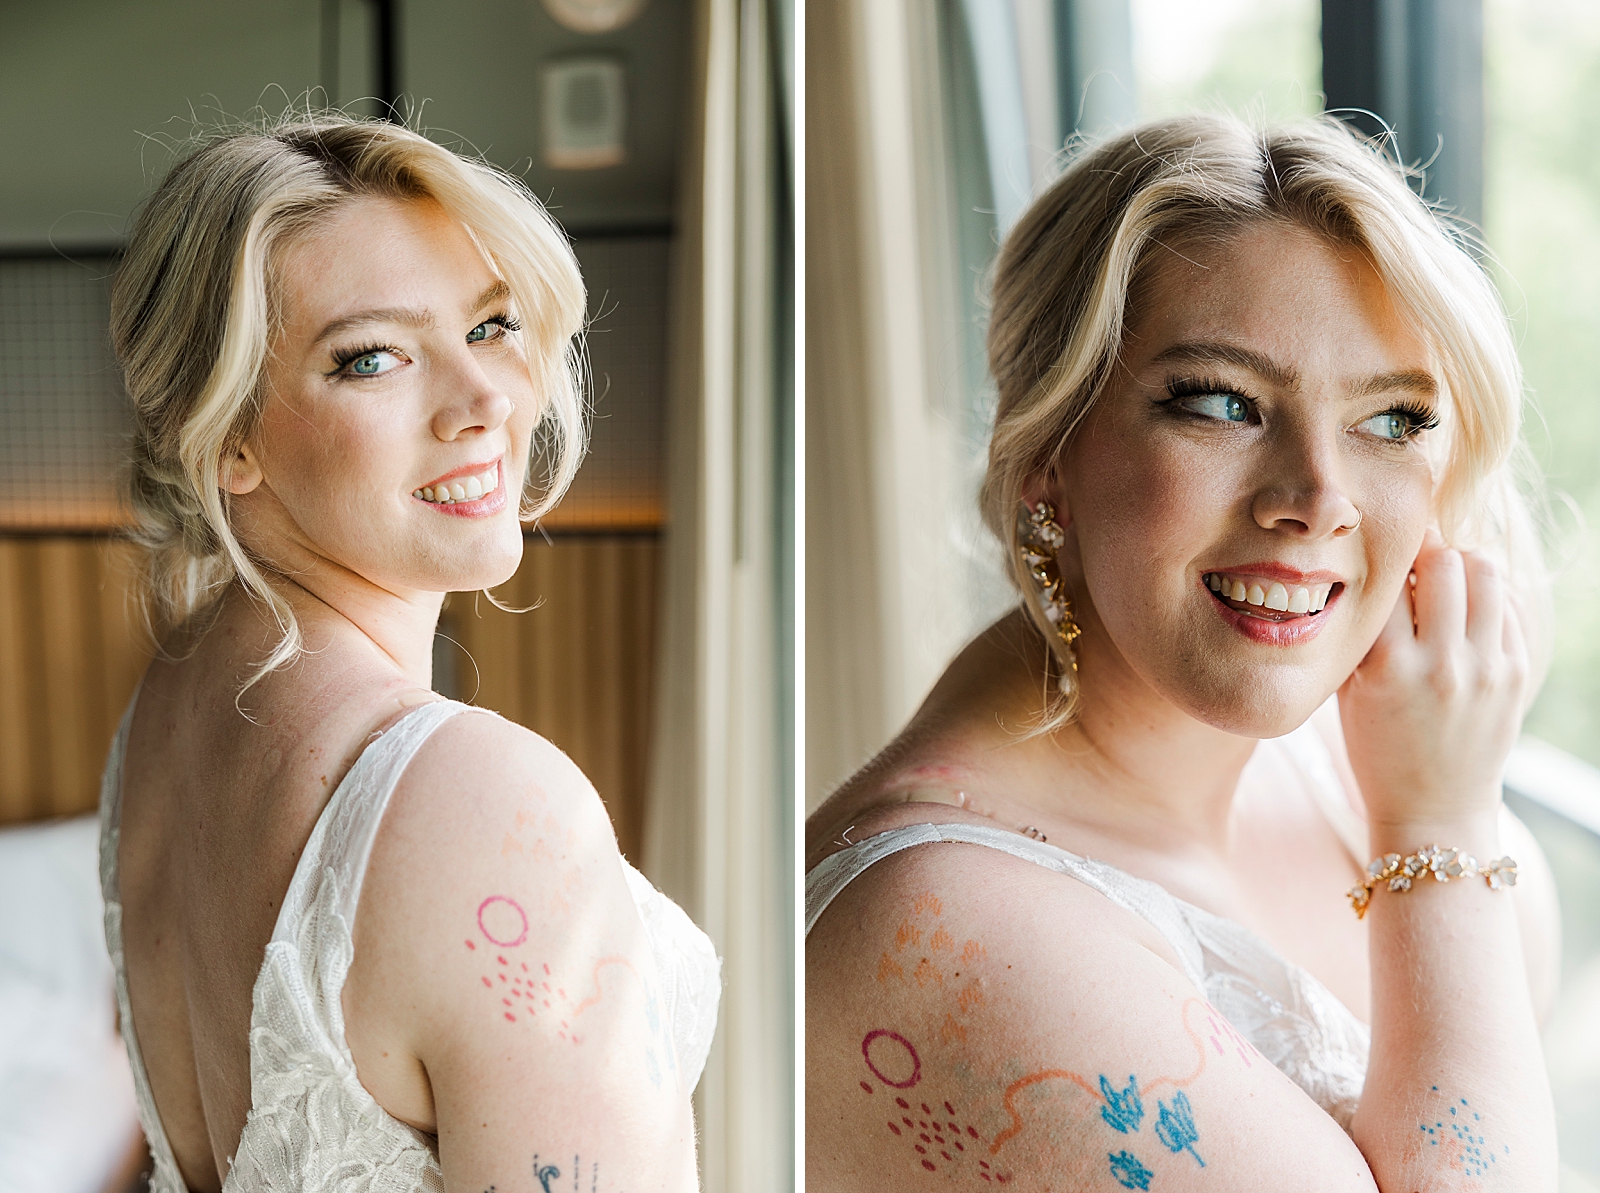 Left: Upper body shot of MK in her wedding gown smiling over her shoulder.
Right: Photo of a smiling MK as she puts on her earrings. 